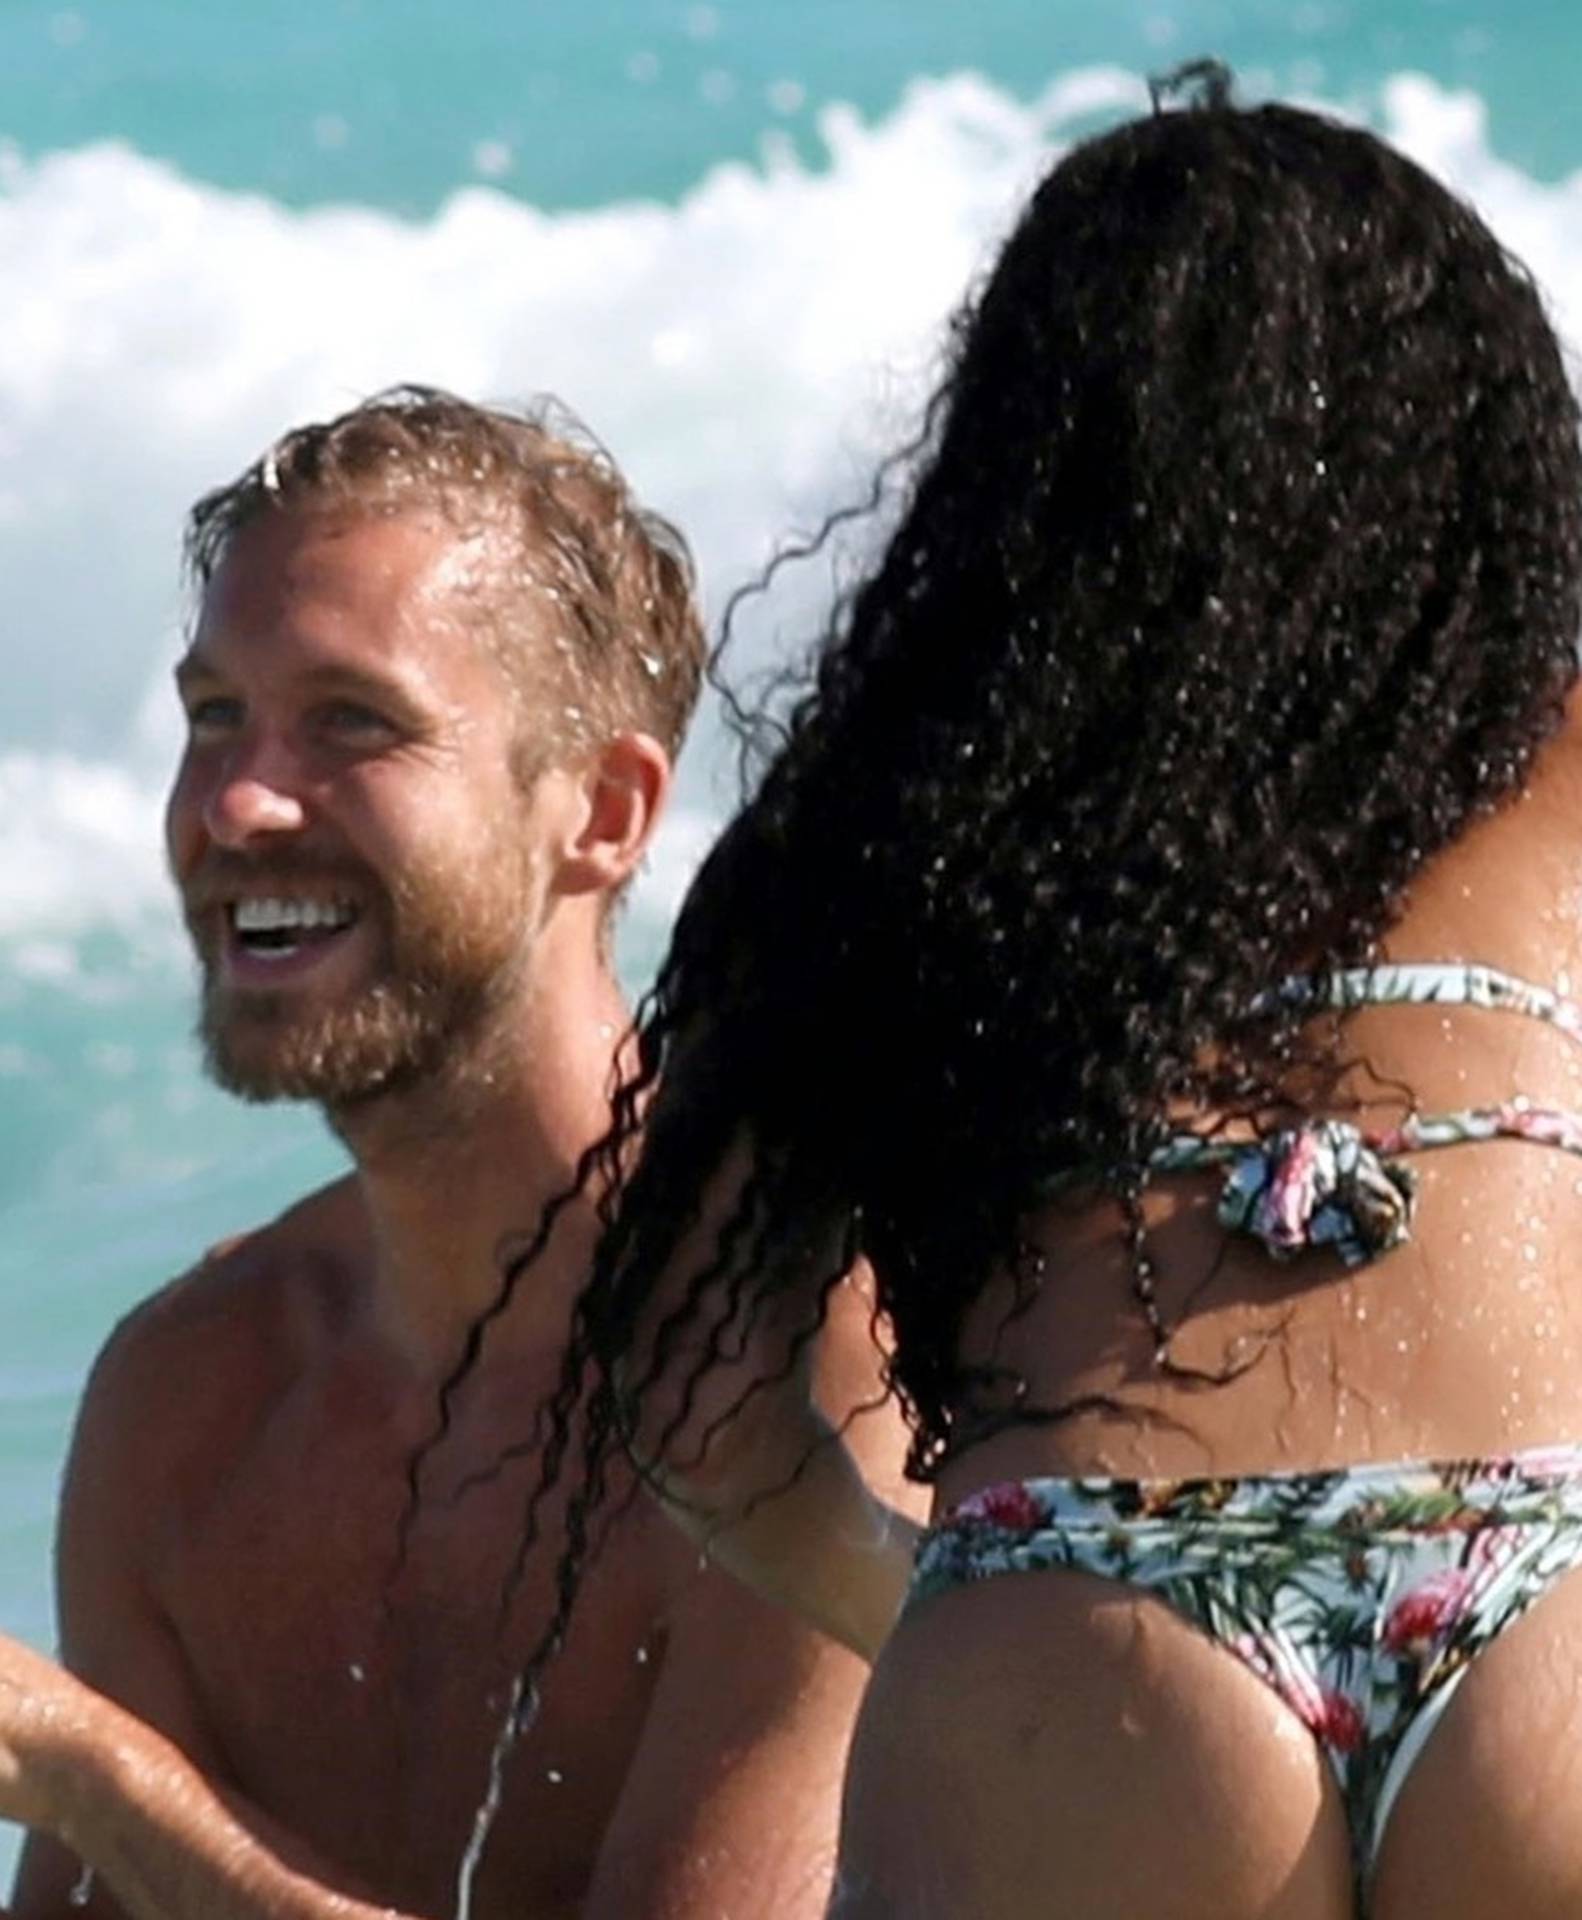 *PREMIUM-EXCLUSIVE* MUST CALL FOR PRICING BEFORE USAGE 
 - STRICTLY NOT AVAILABLE FOR ONLINE USAGE UNTIL 22:00 PM UK TIME ON 25/08/2022  - 

Scottish DJ Calvin Harris and his girlfriend Vick Hope look very much in love as they are snapped having a great t